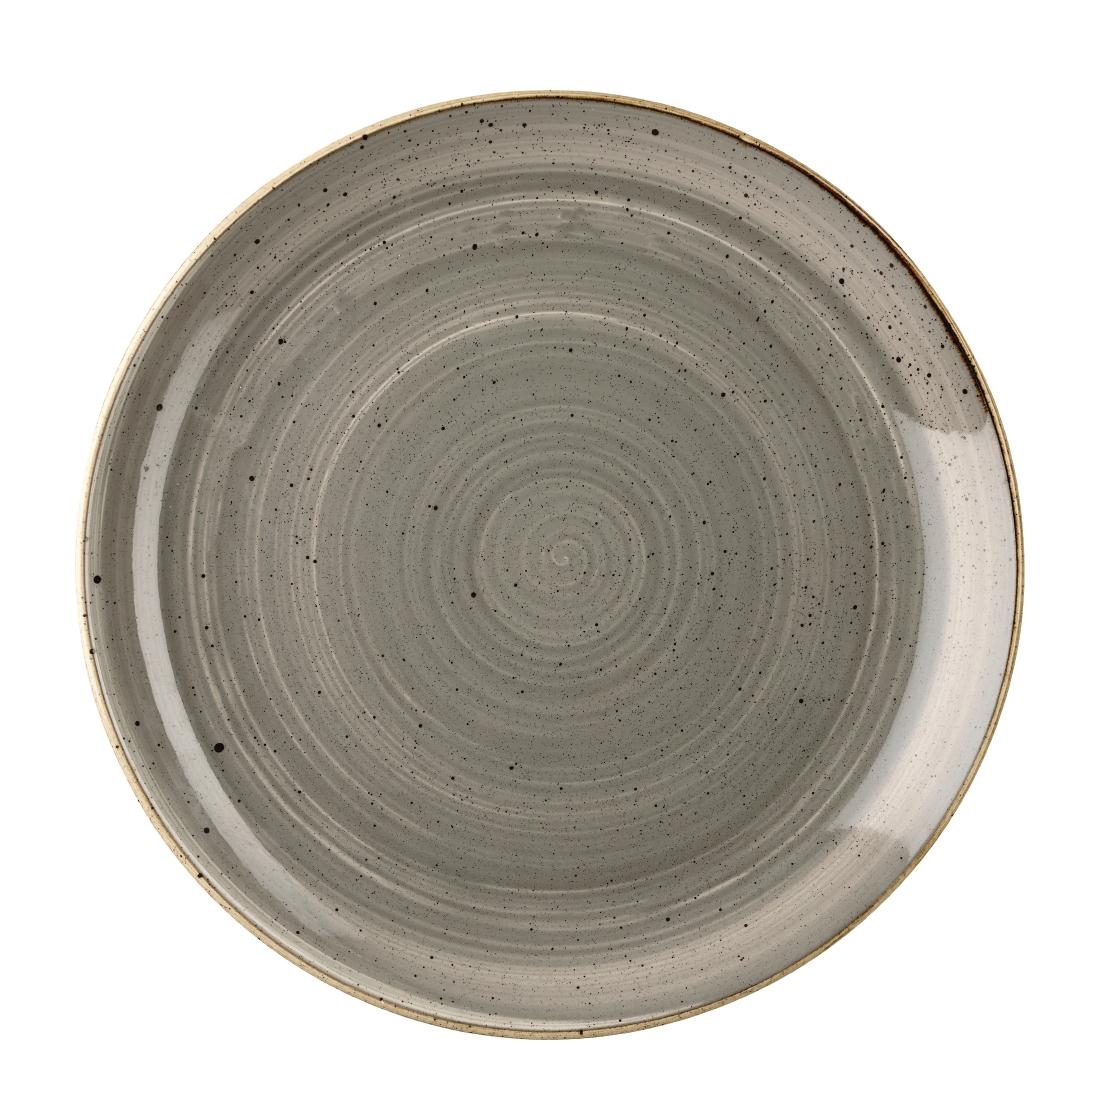 Churchill Stonecast Round Coupe Plate Peppercorn Grey 165mm